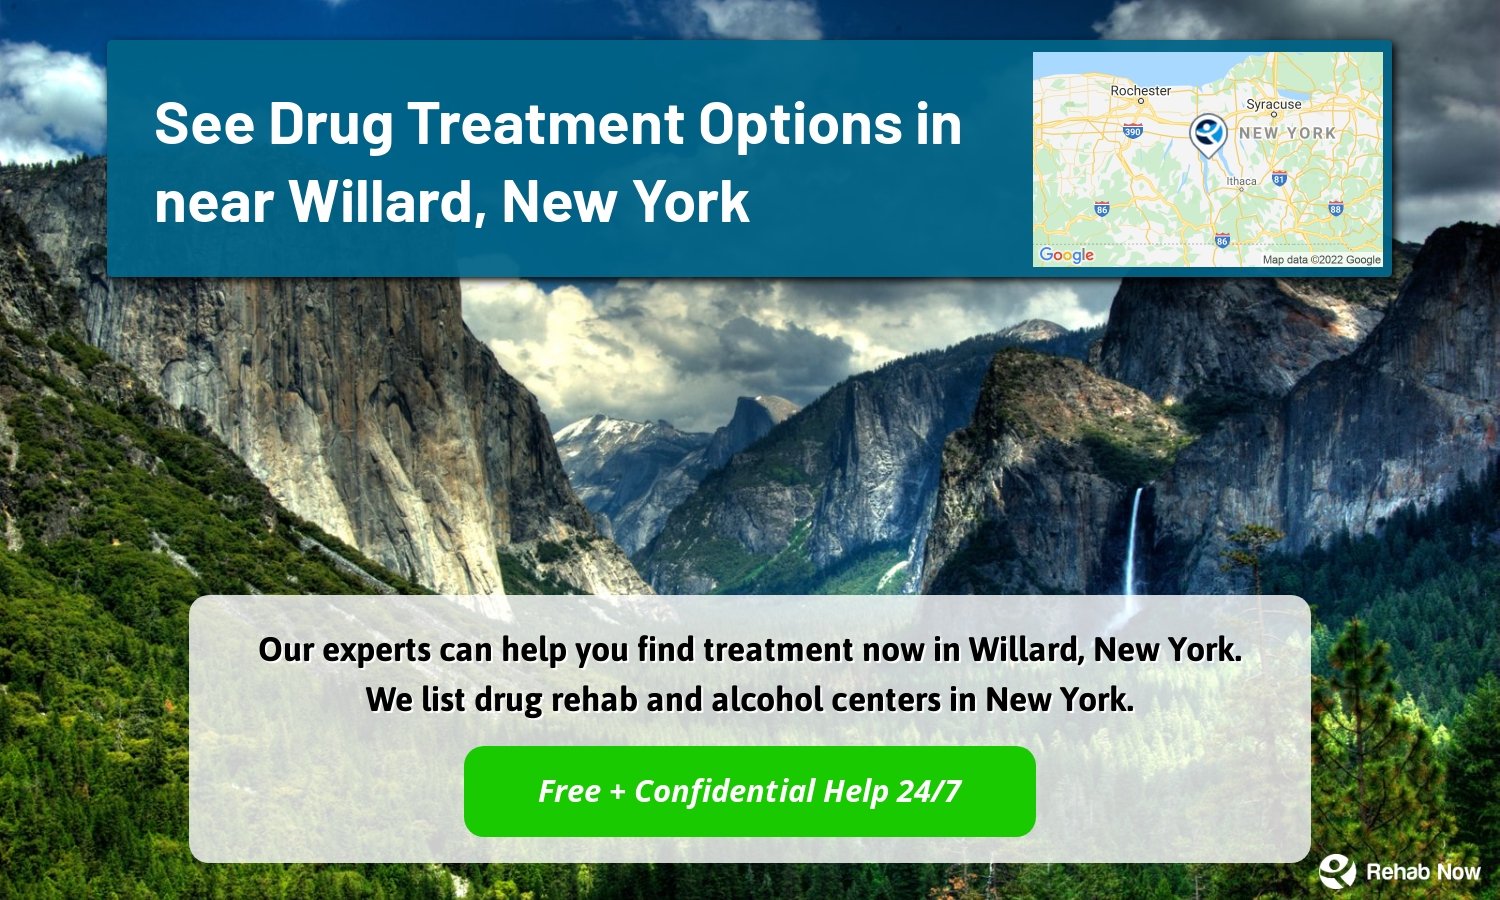 Our experts can help you find treatment now in Willard, New York. We list drug rehab and alcohol centers in New York.